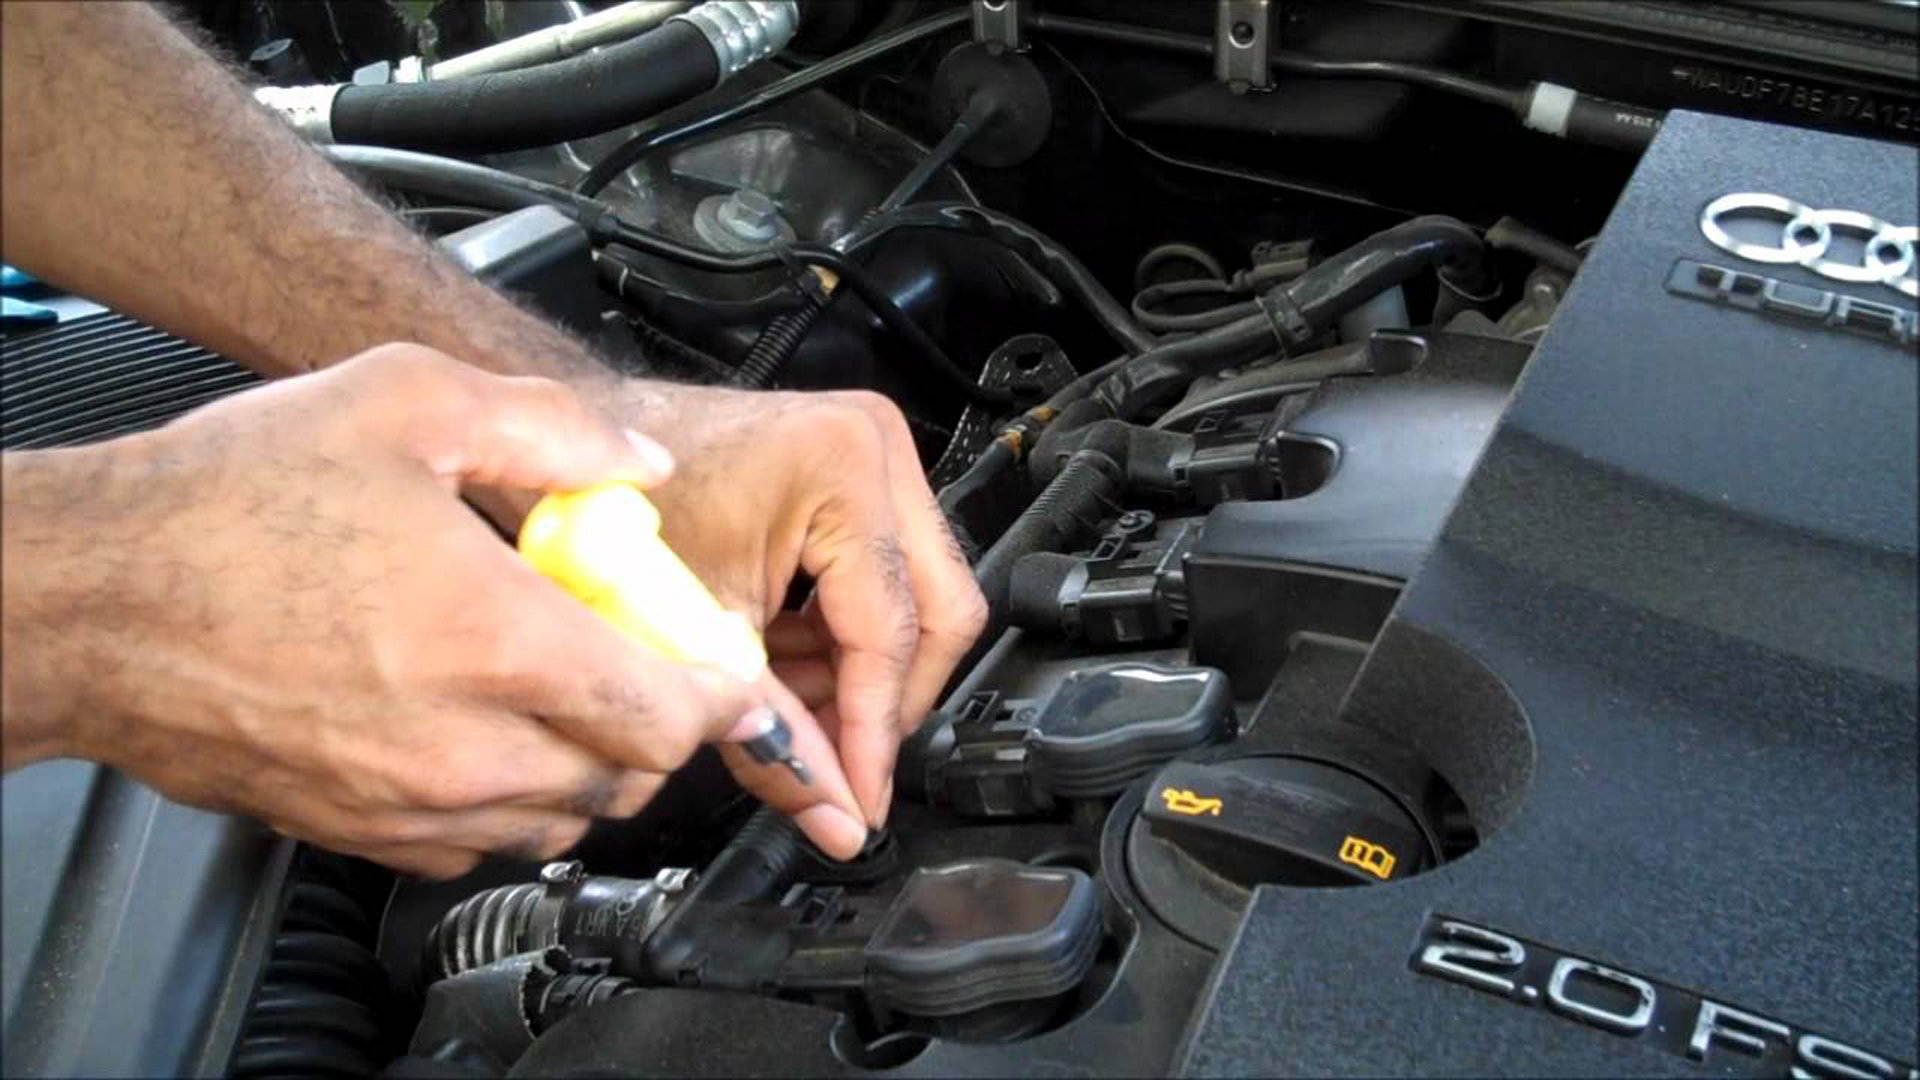 How to change spark plugs on Audi A6 C5 Avant – replacement guide